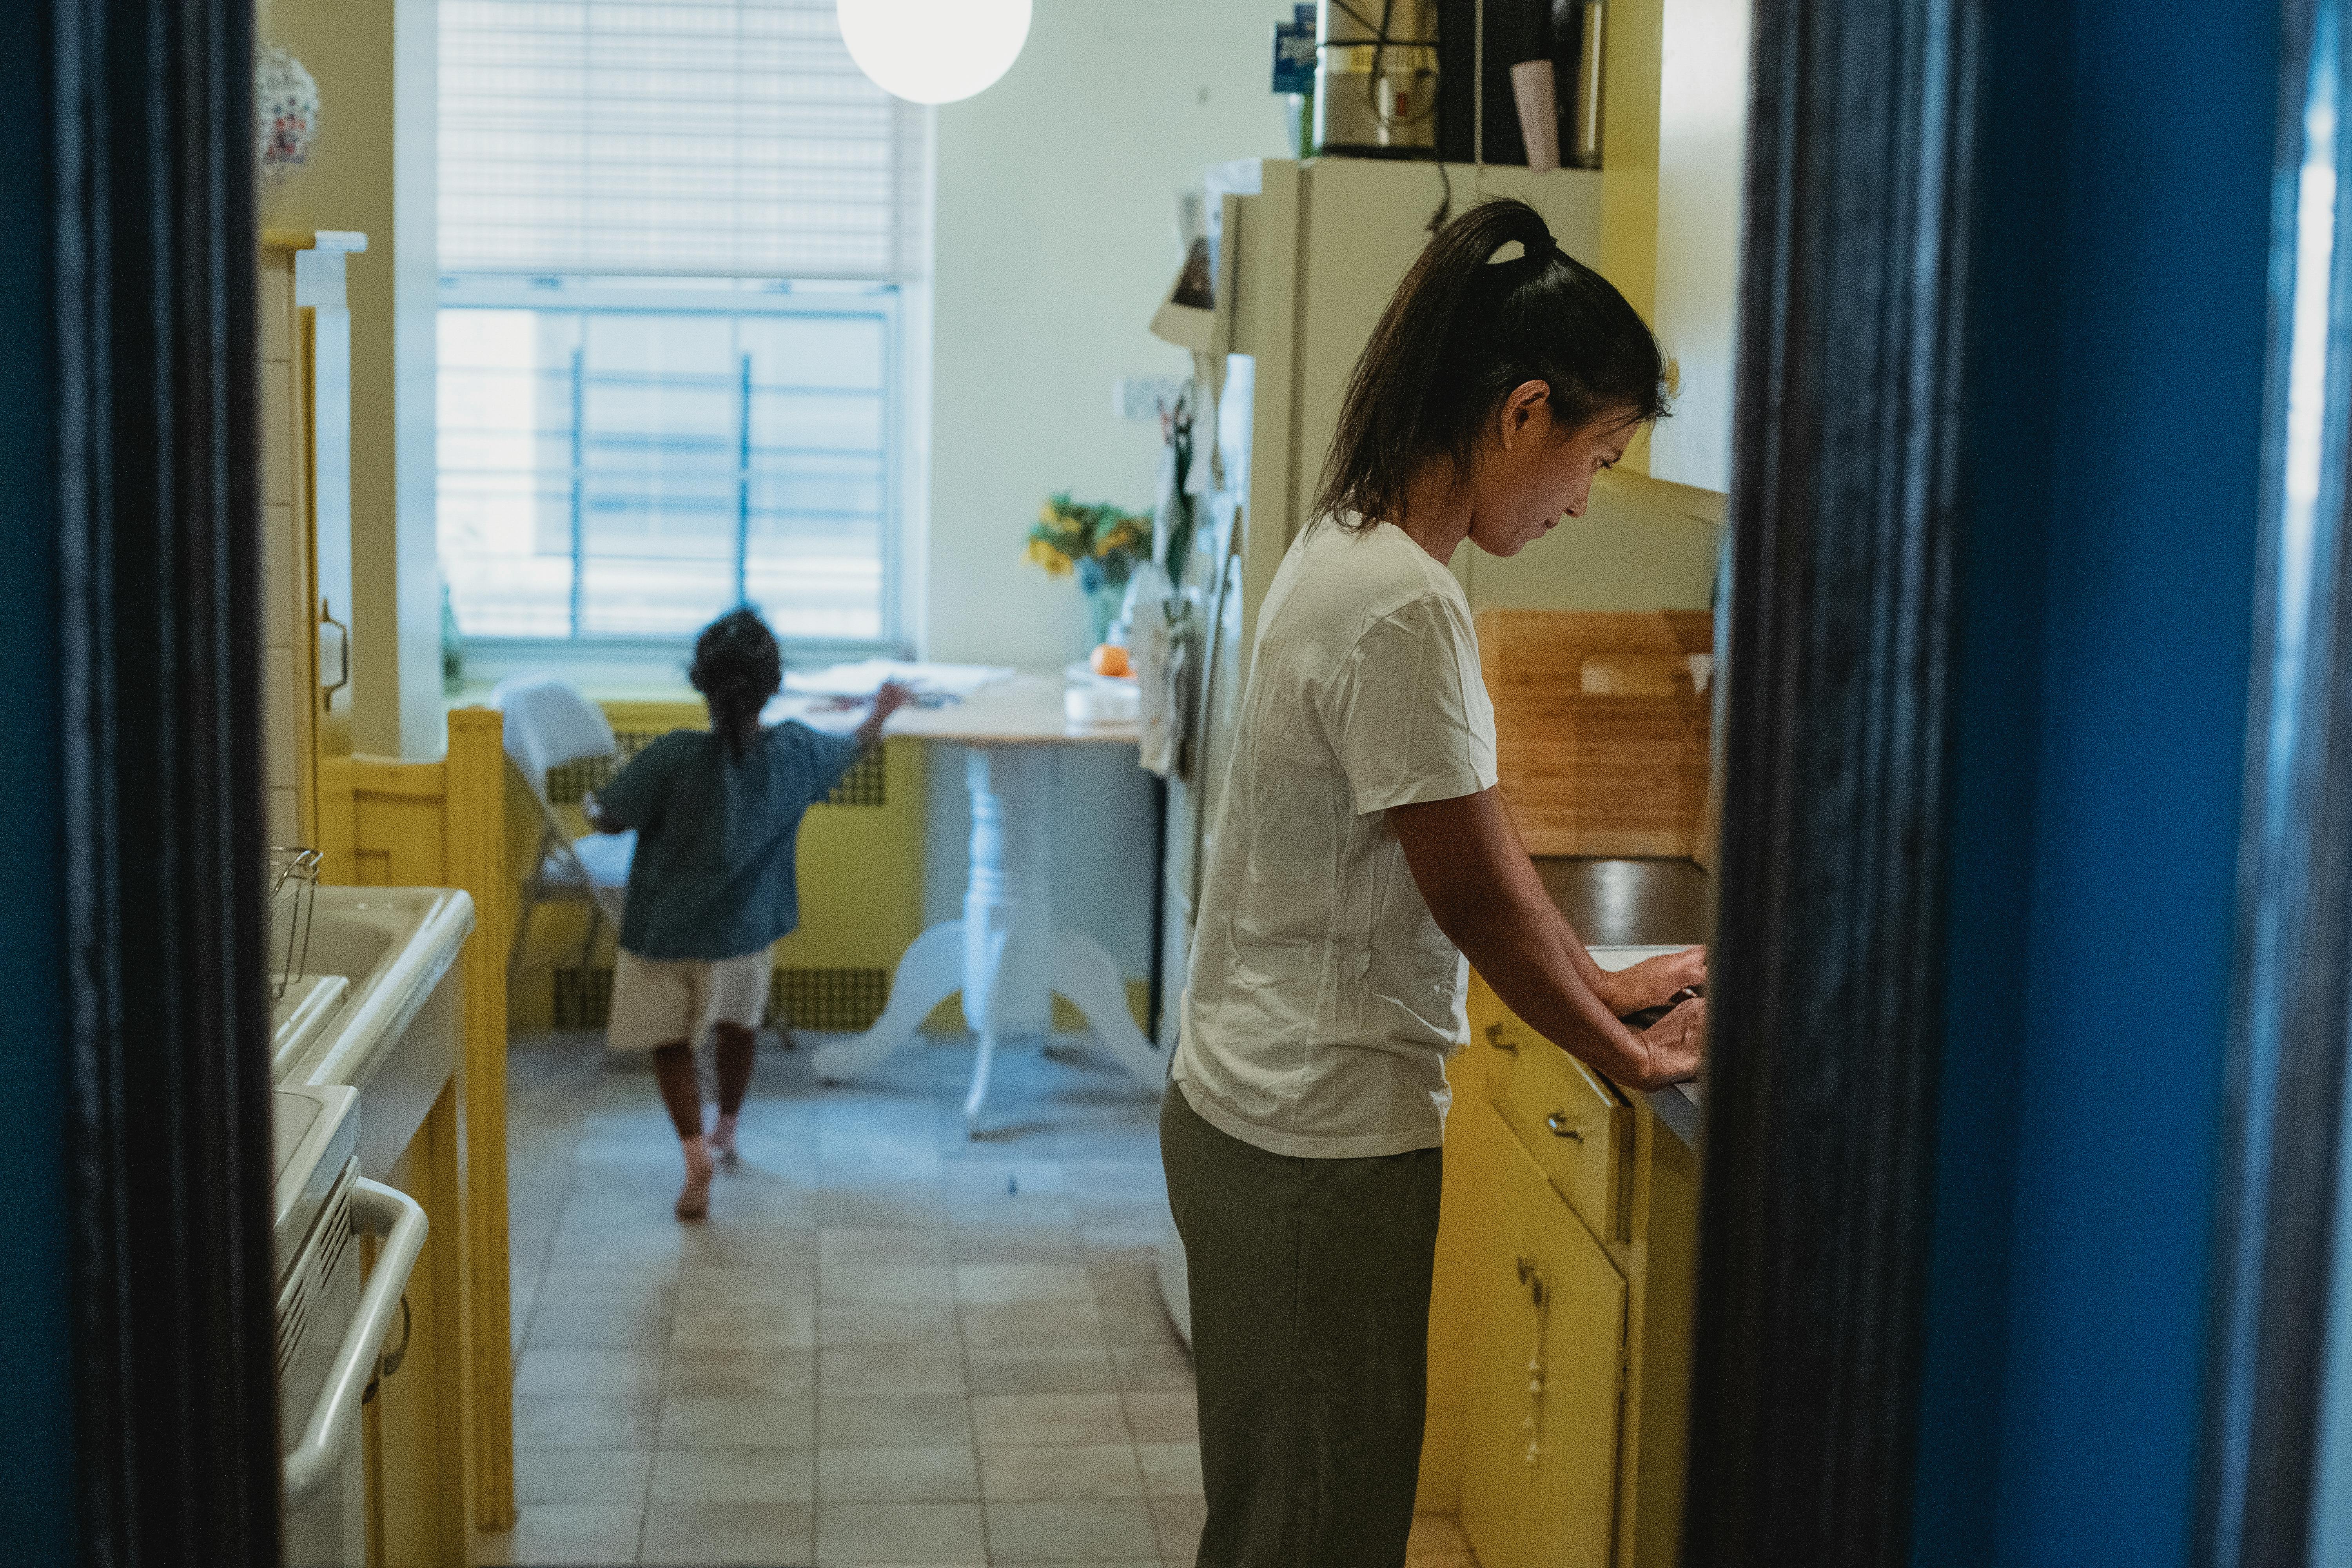 asian mother and daughter in kitchen with blue doorway